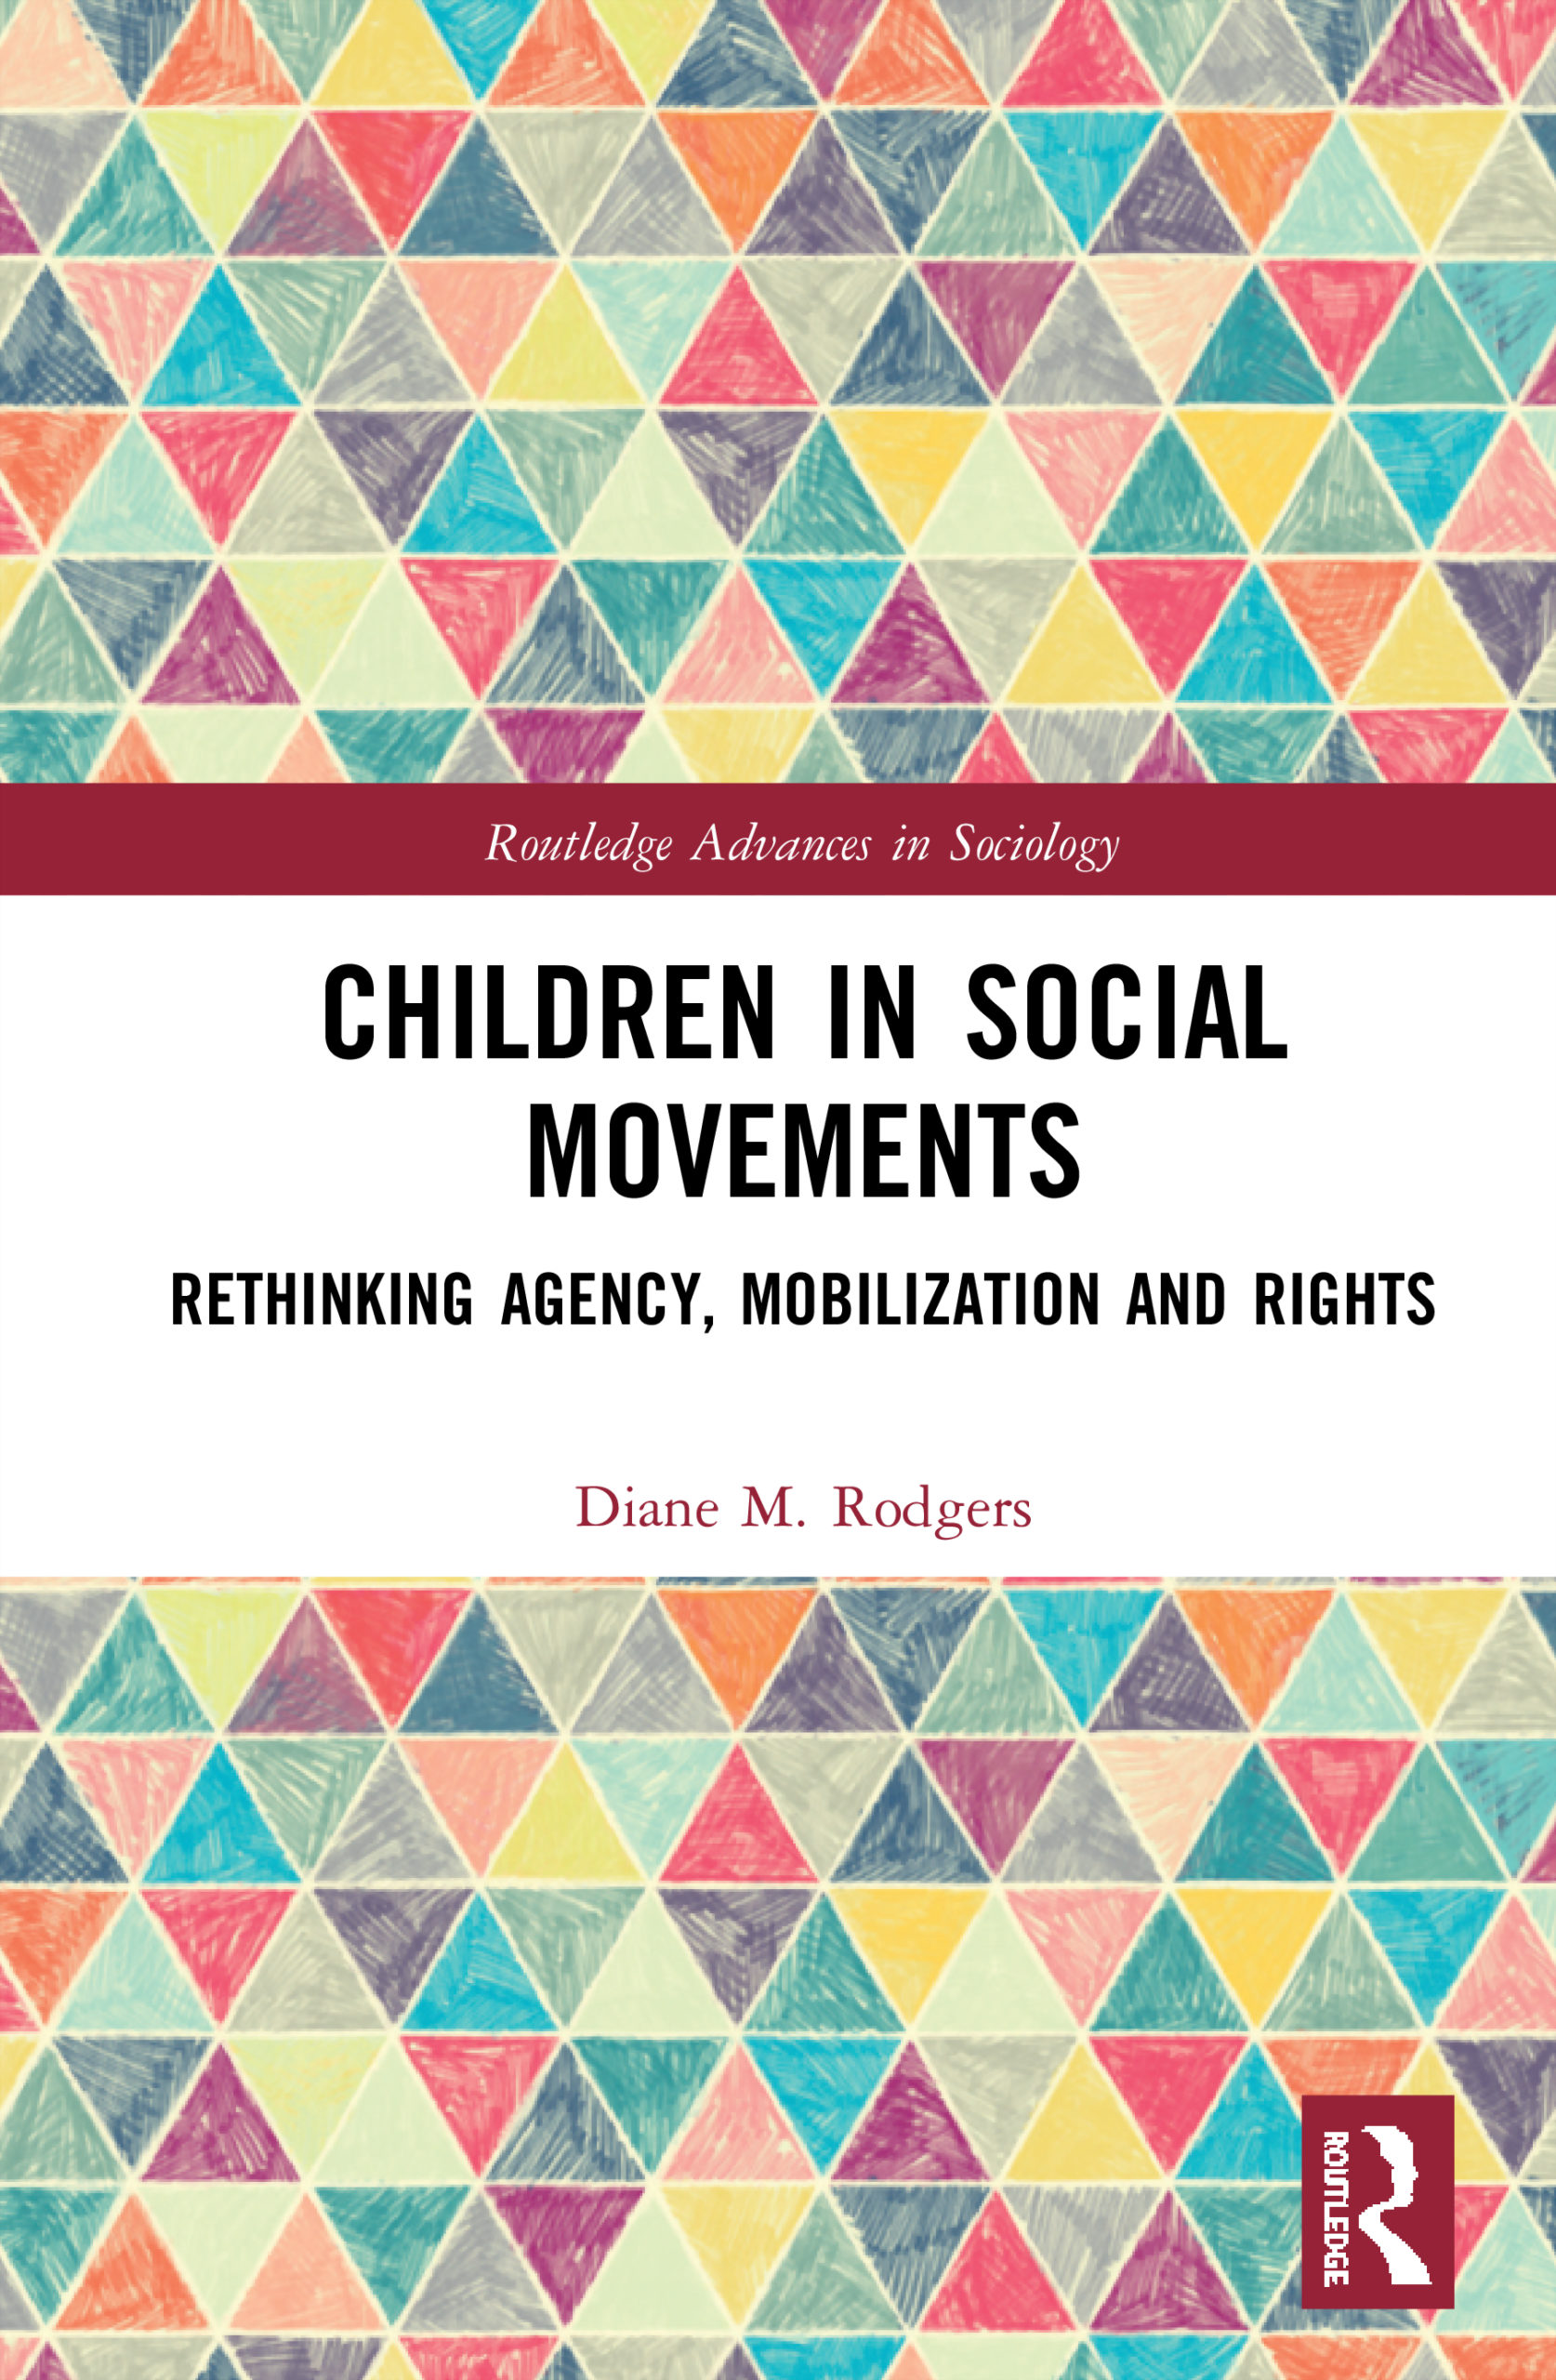 Children in Social Movements: Rethinking Agency, Mobilization and Rights